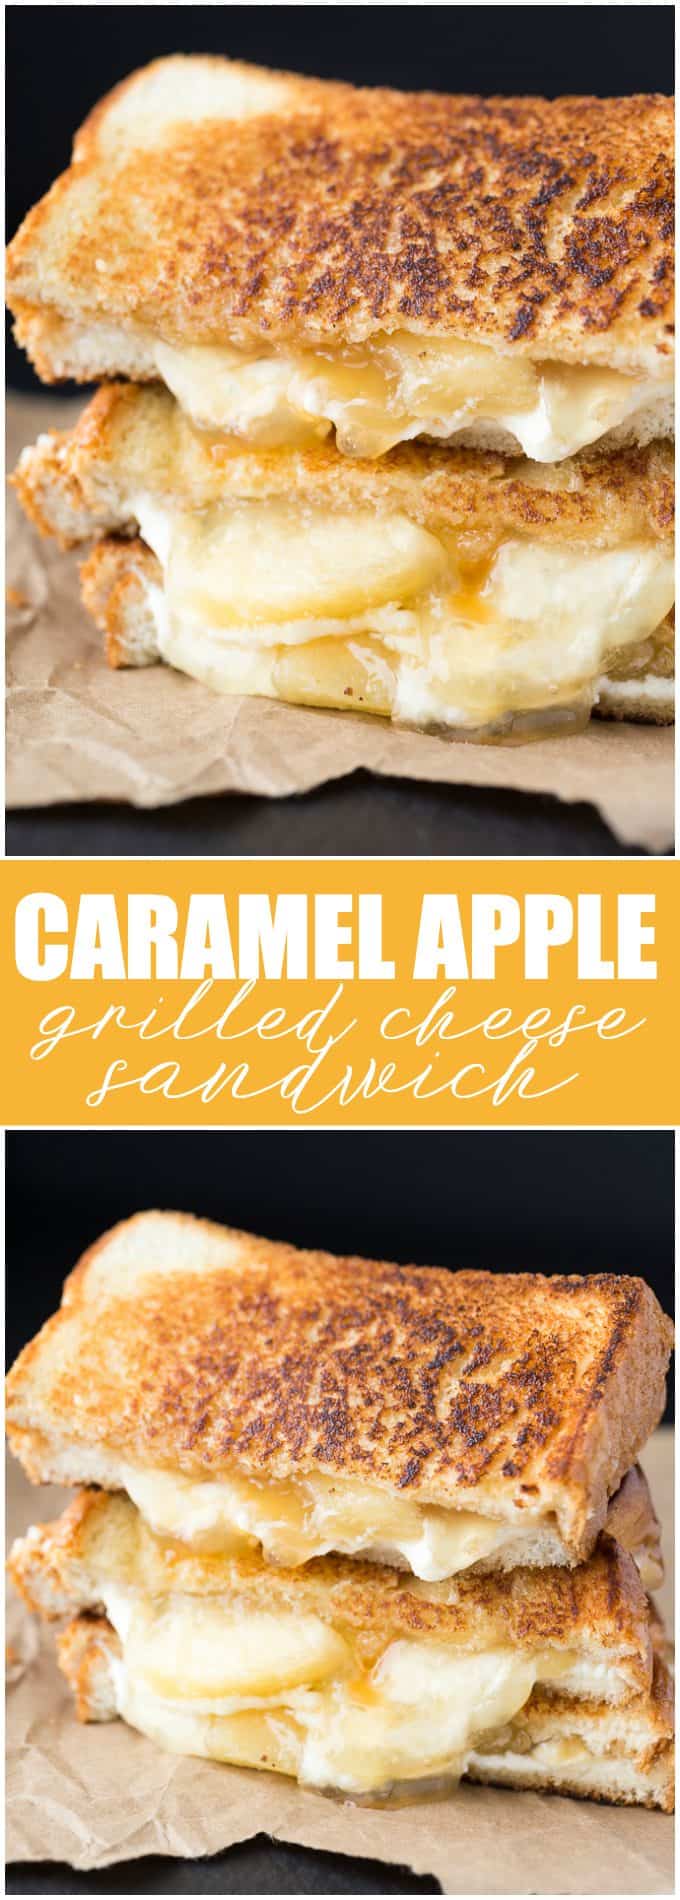 Caramel Apple Grilled Cheese Sandwich - The best dessert grilled cheese! This sandwich tastes just like caramel apple cheesecake with easy pie filling and mascarpone cheese.